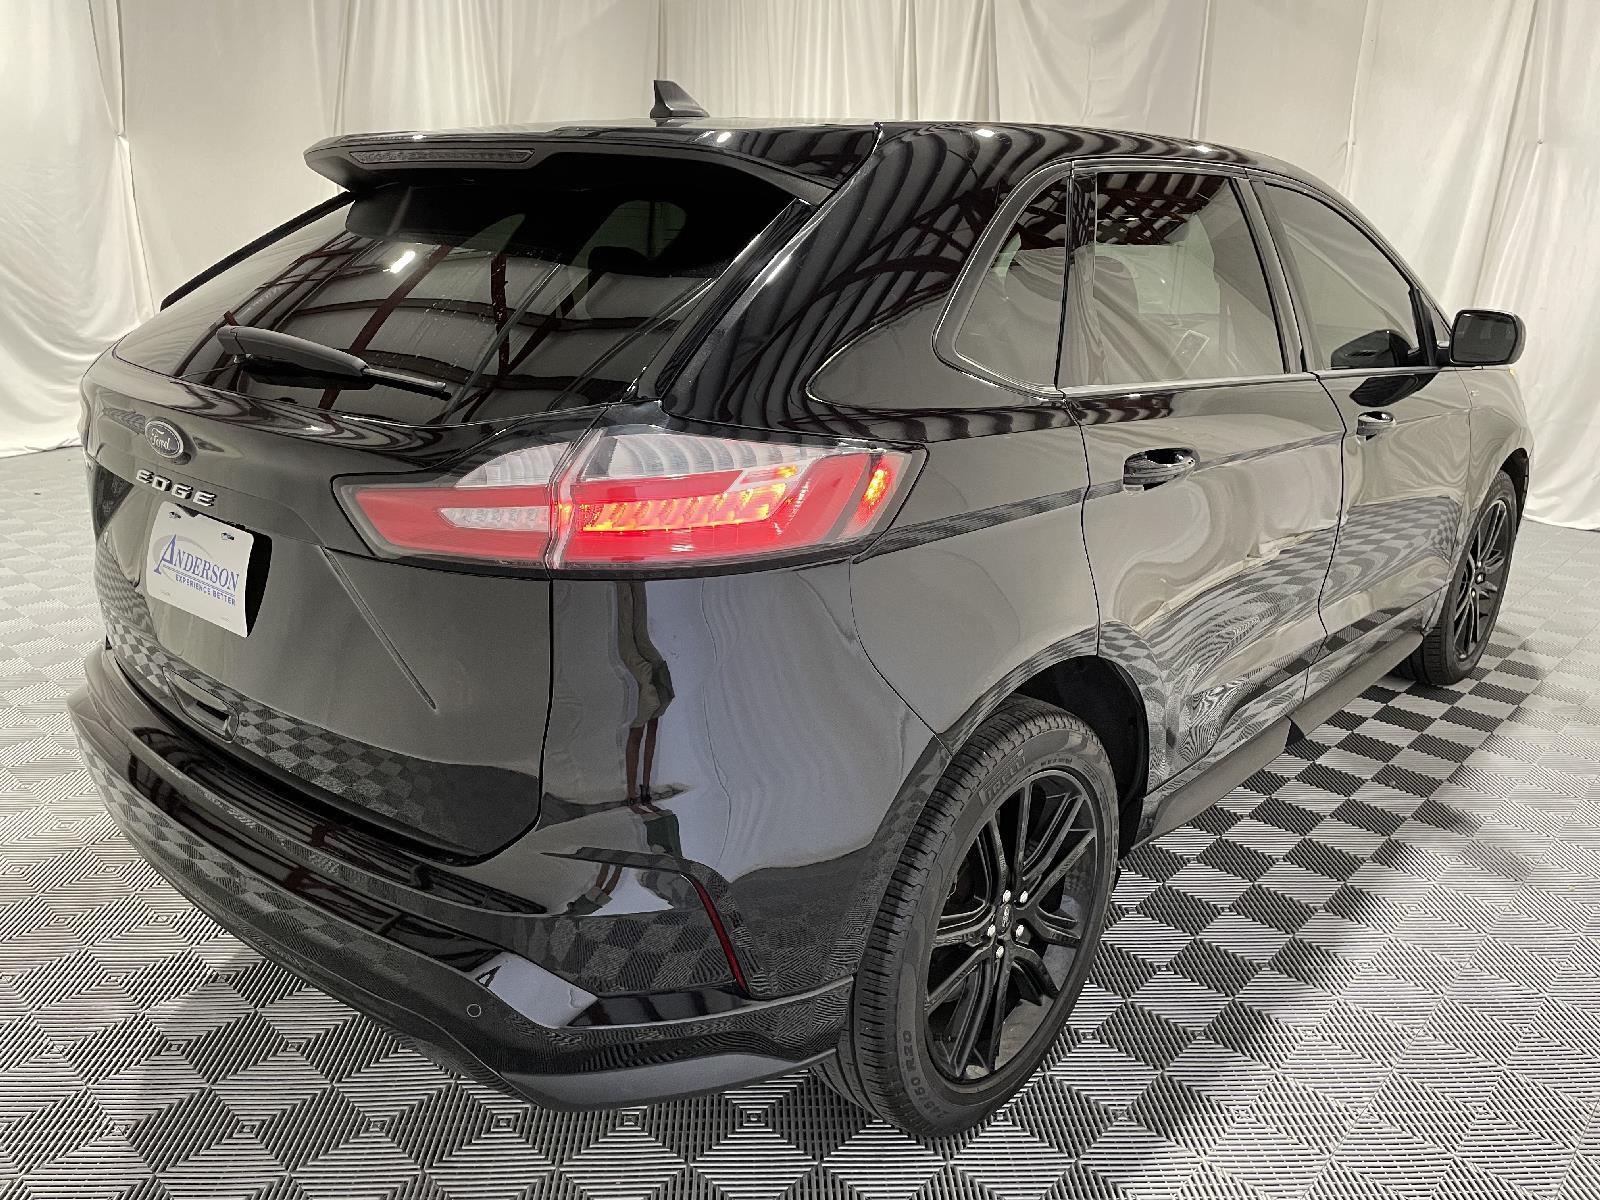 Used 2022 Ford Edge SEL/ST-Line wagon 4 dr. for sale in St Joseph MO